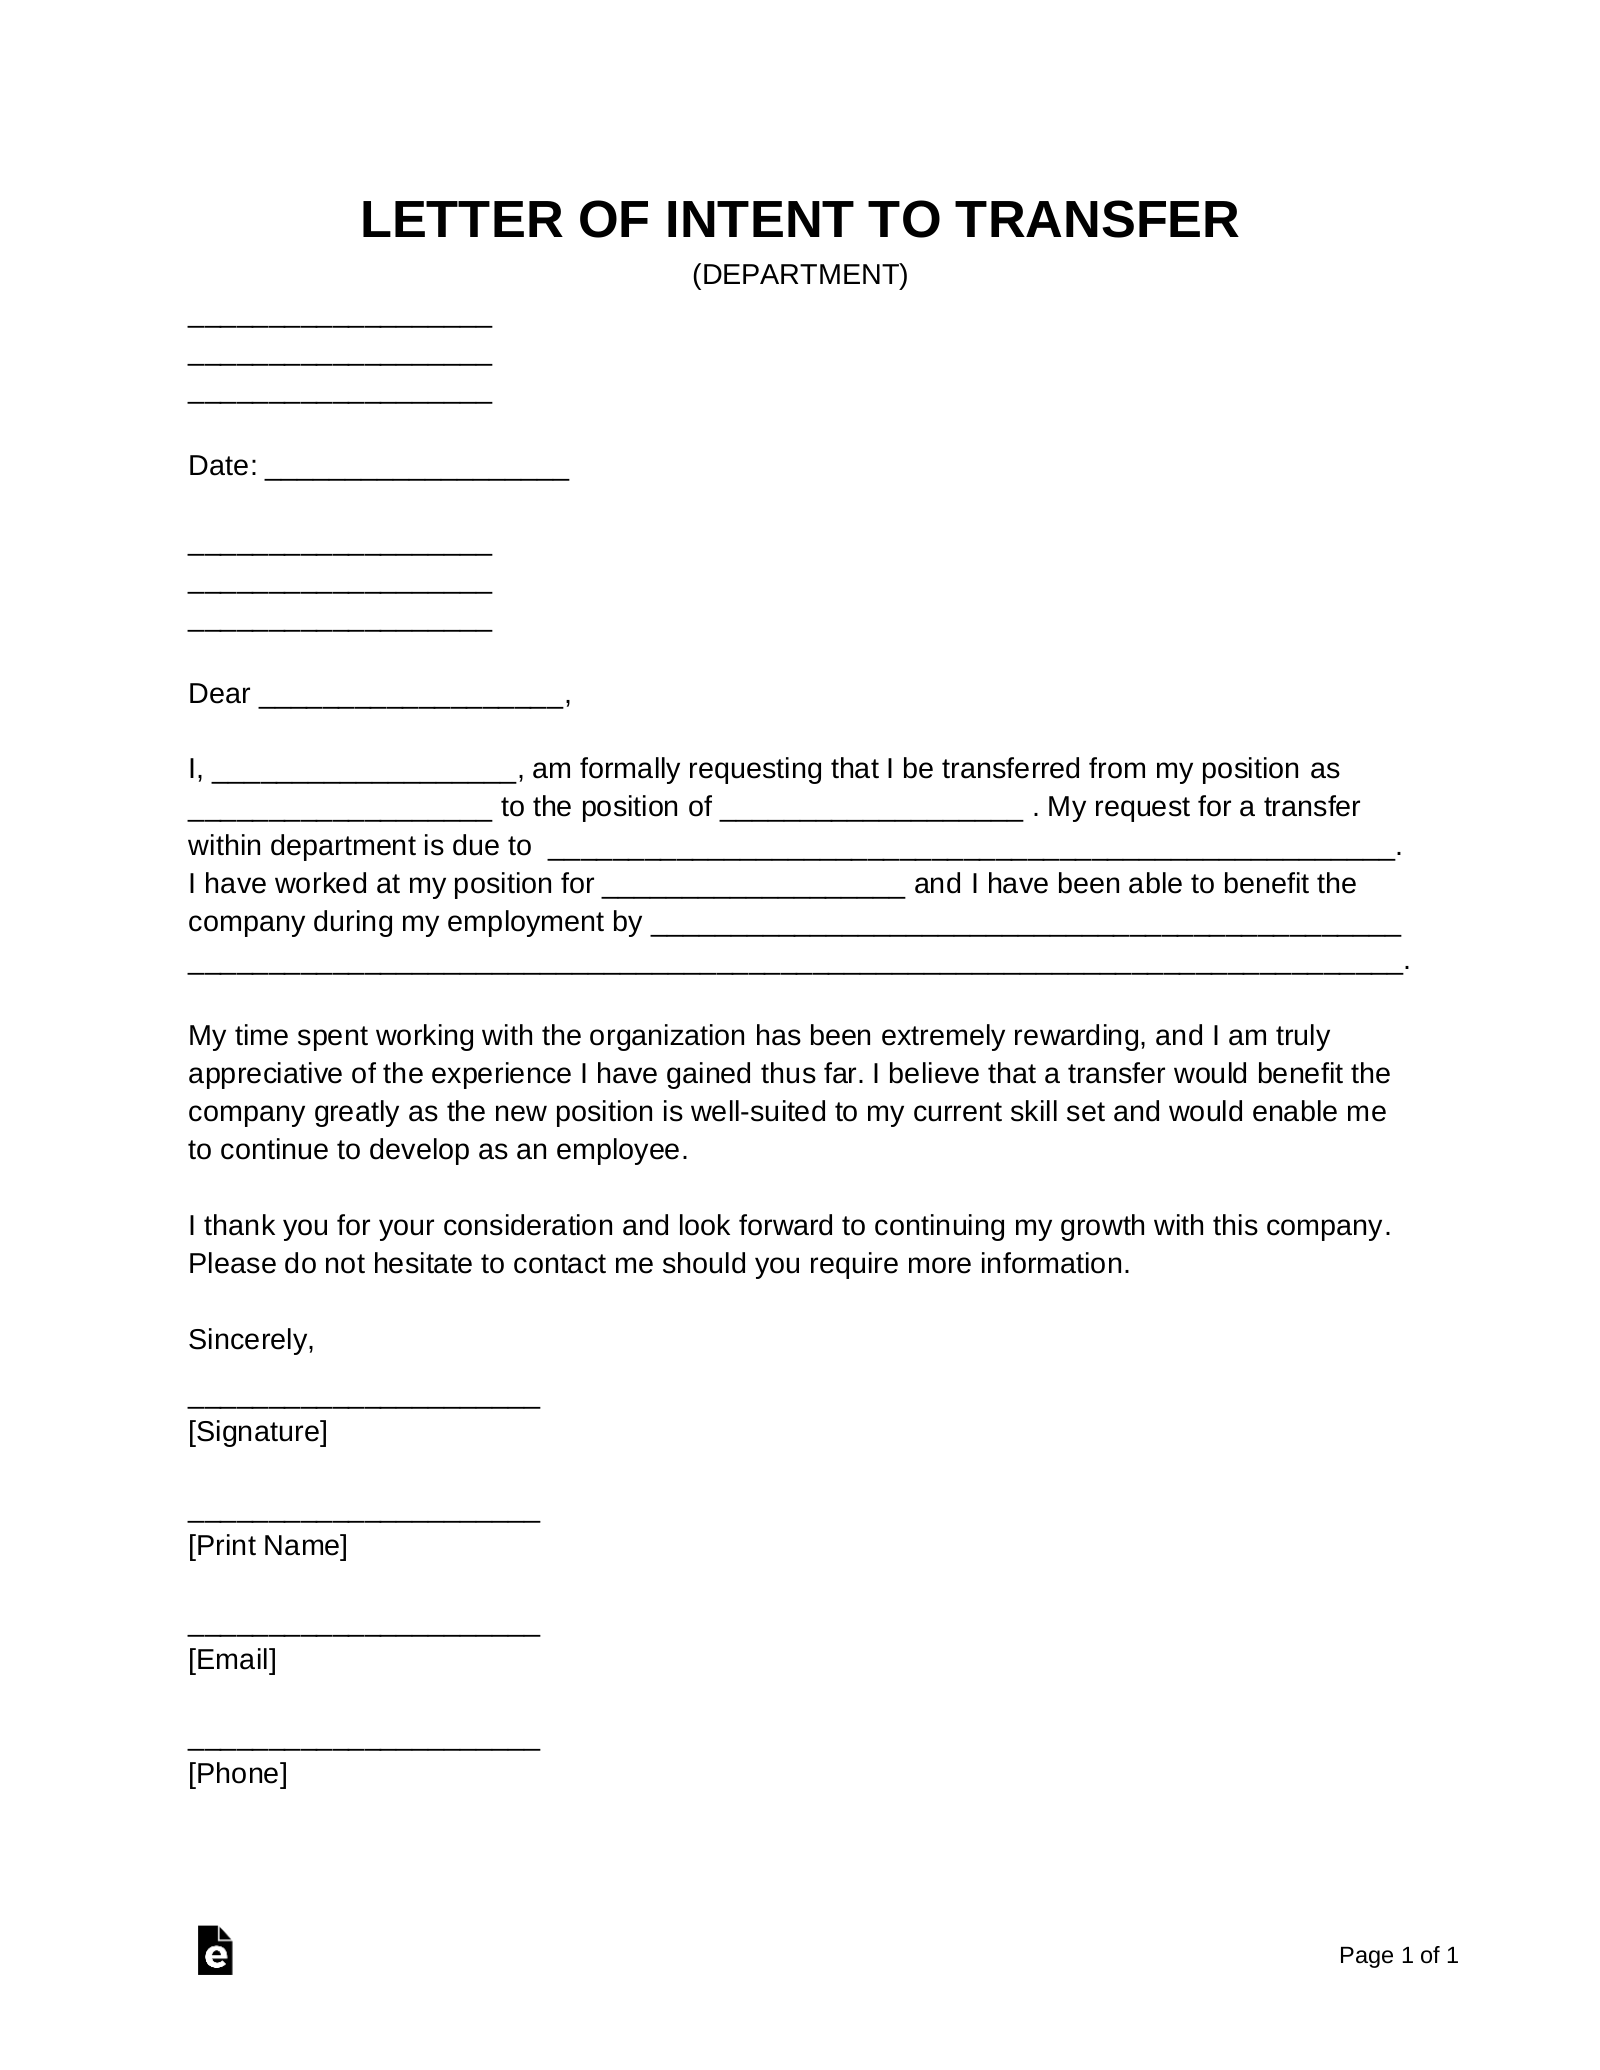 Transfer Department/Job Letter of Intent Template